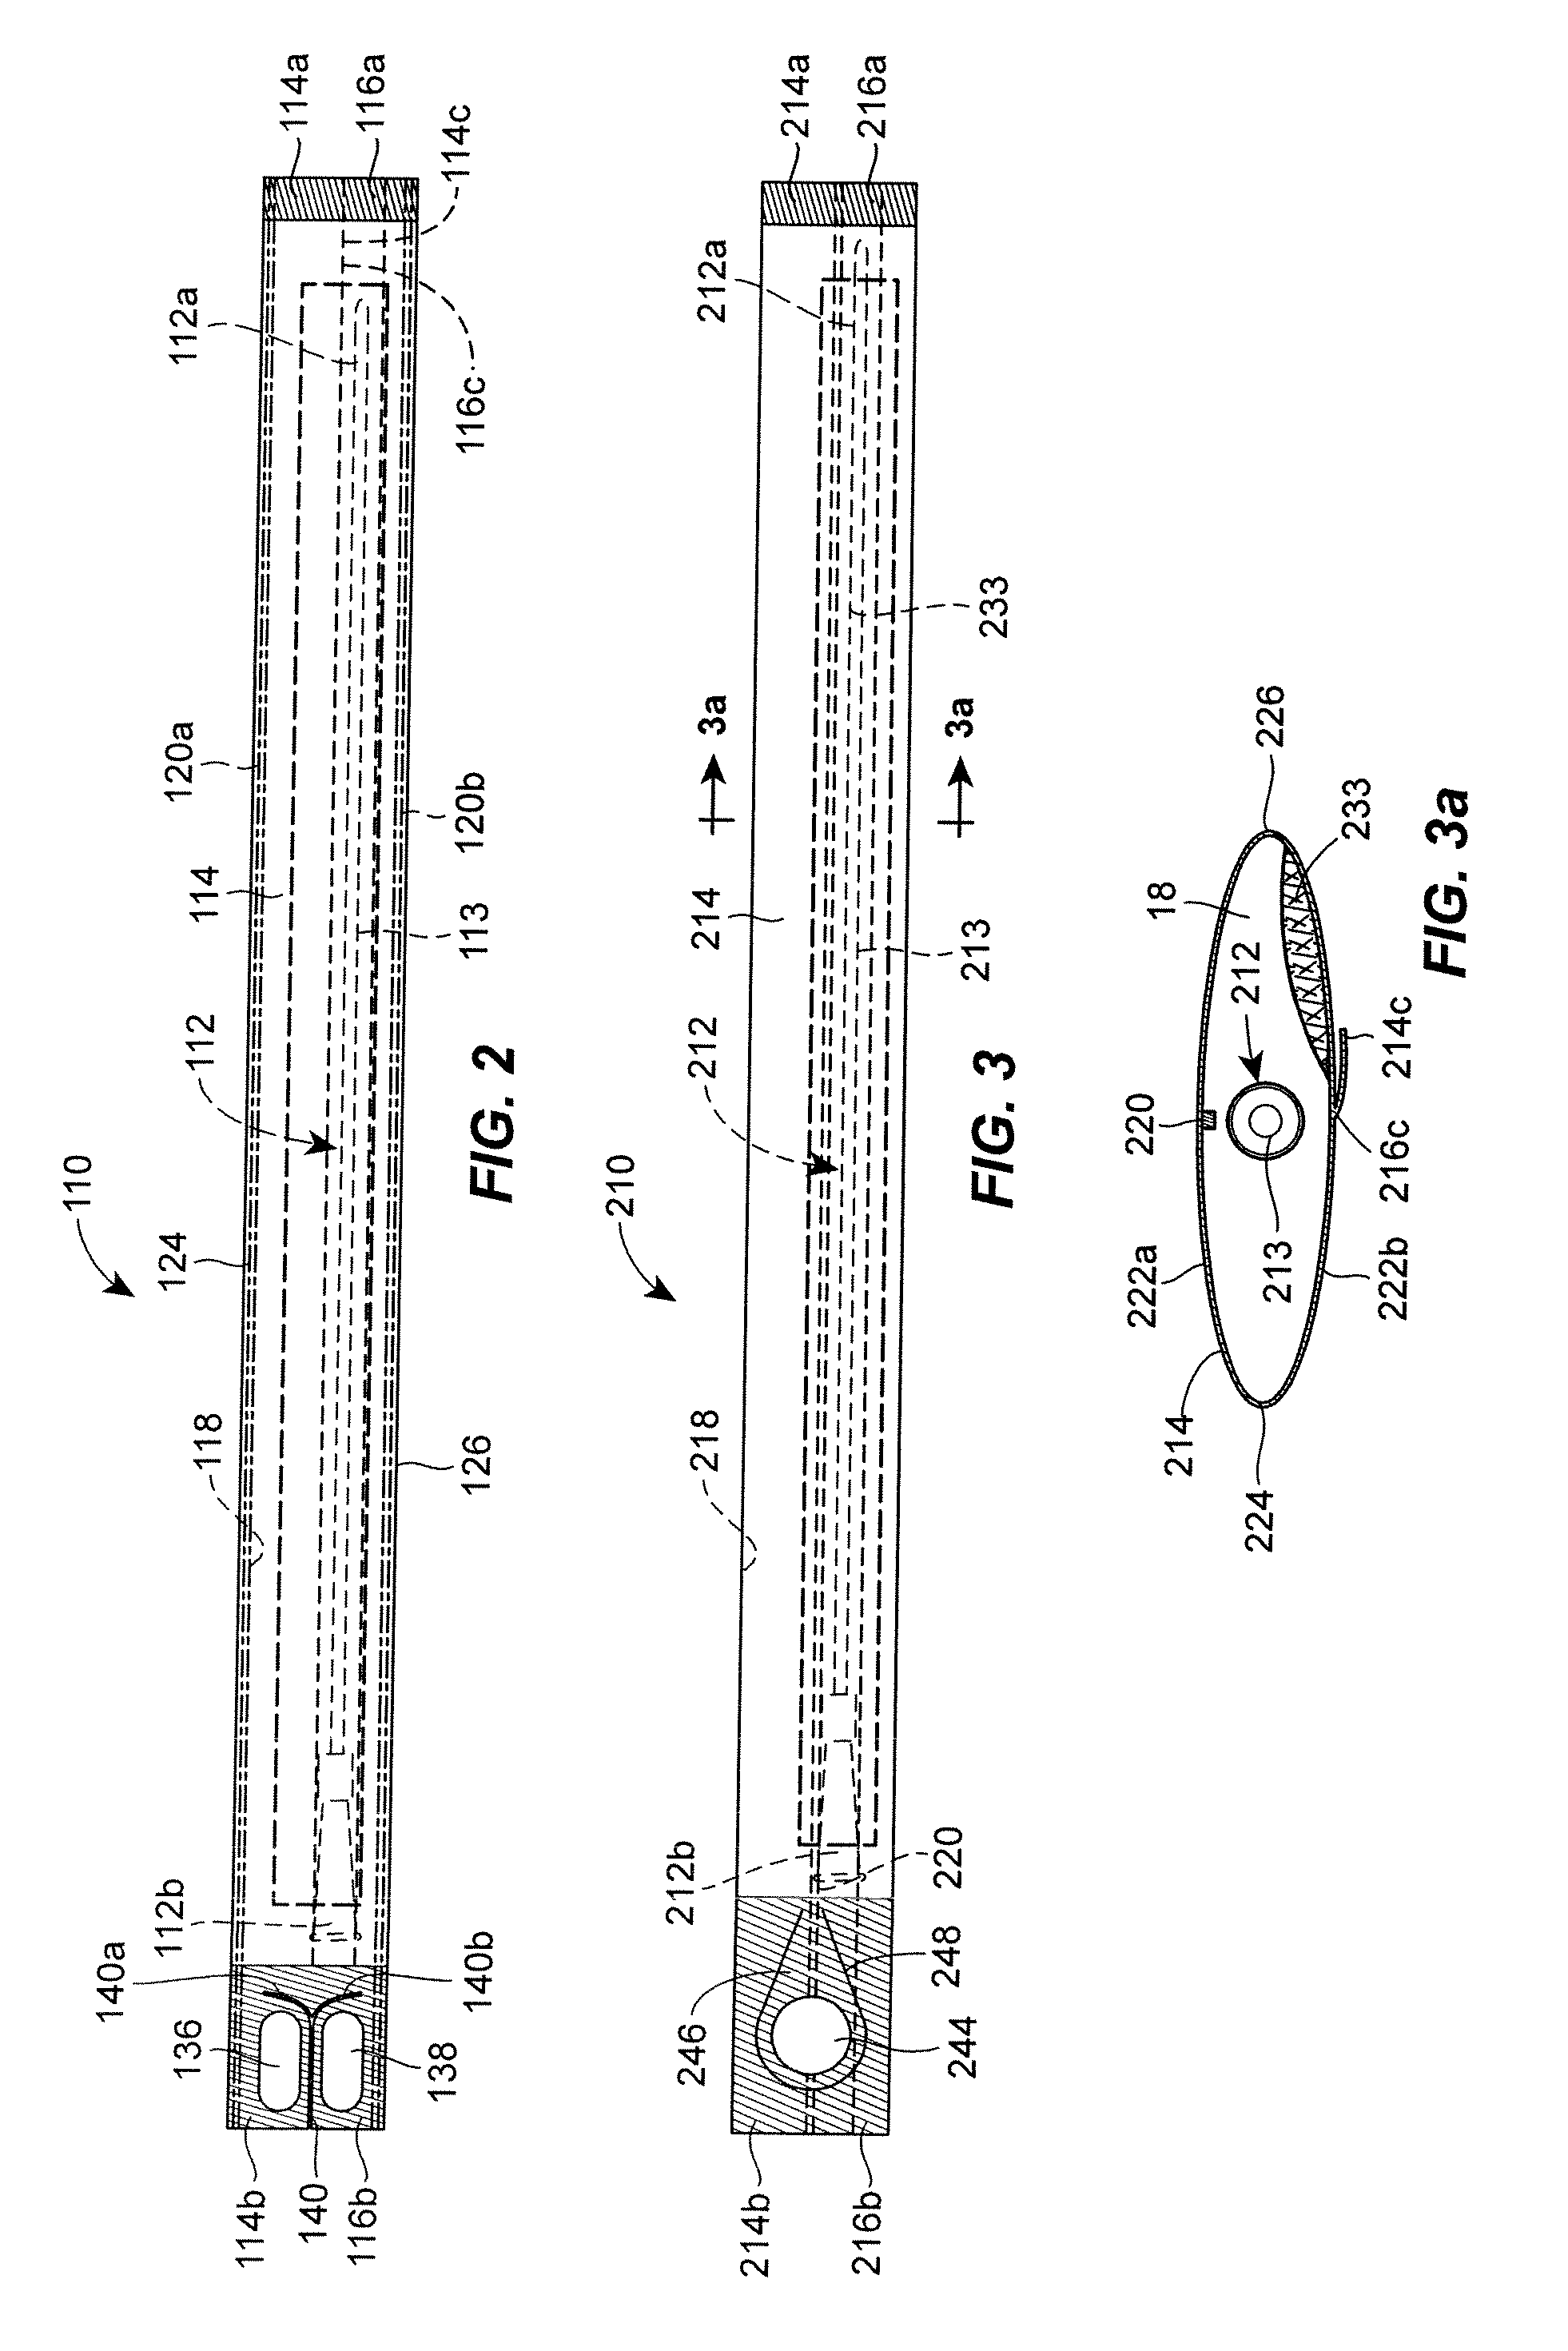 Catheter product package and method of forming same